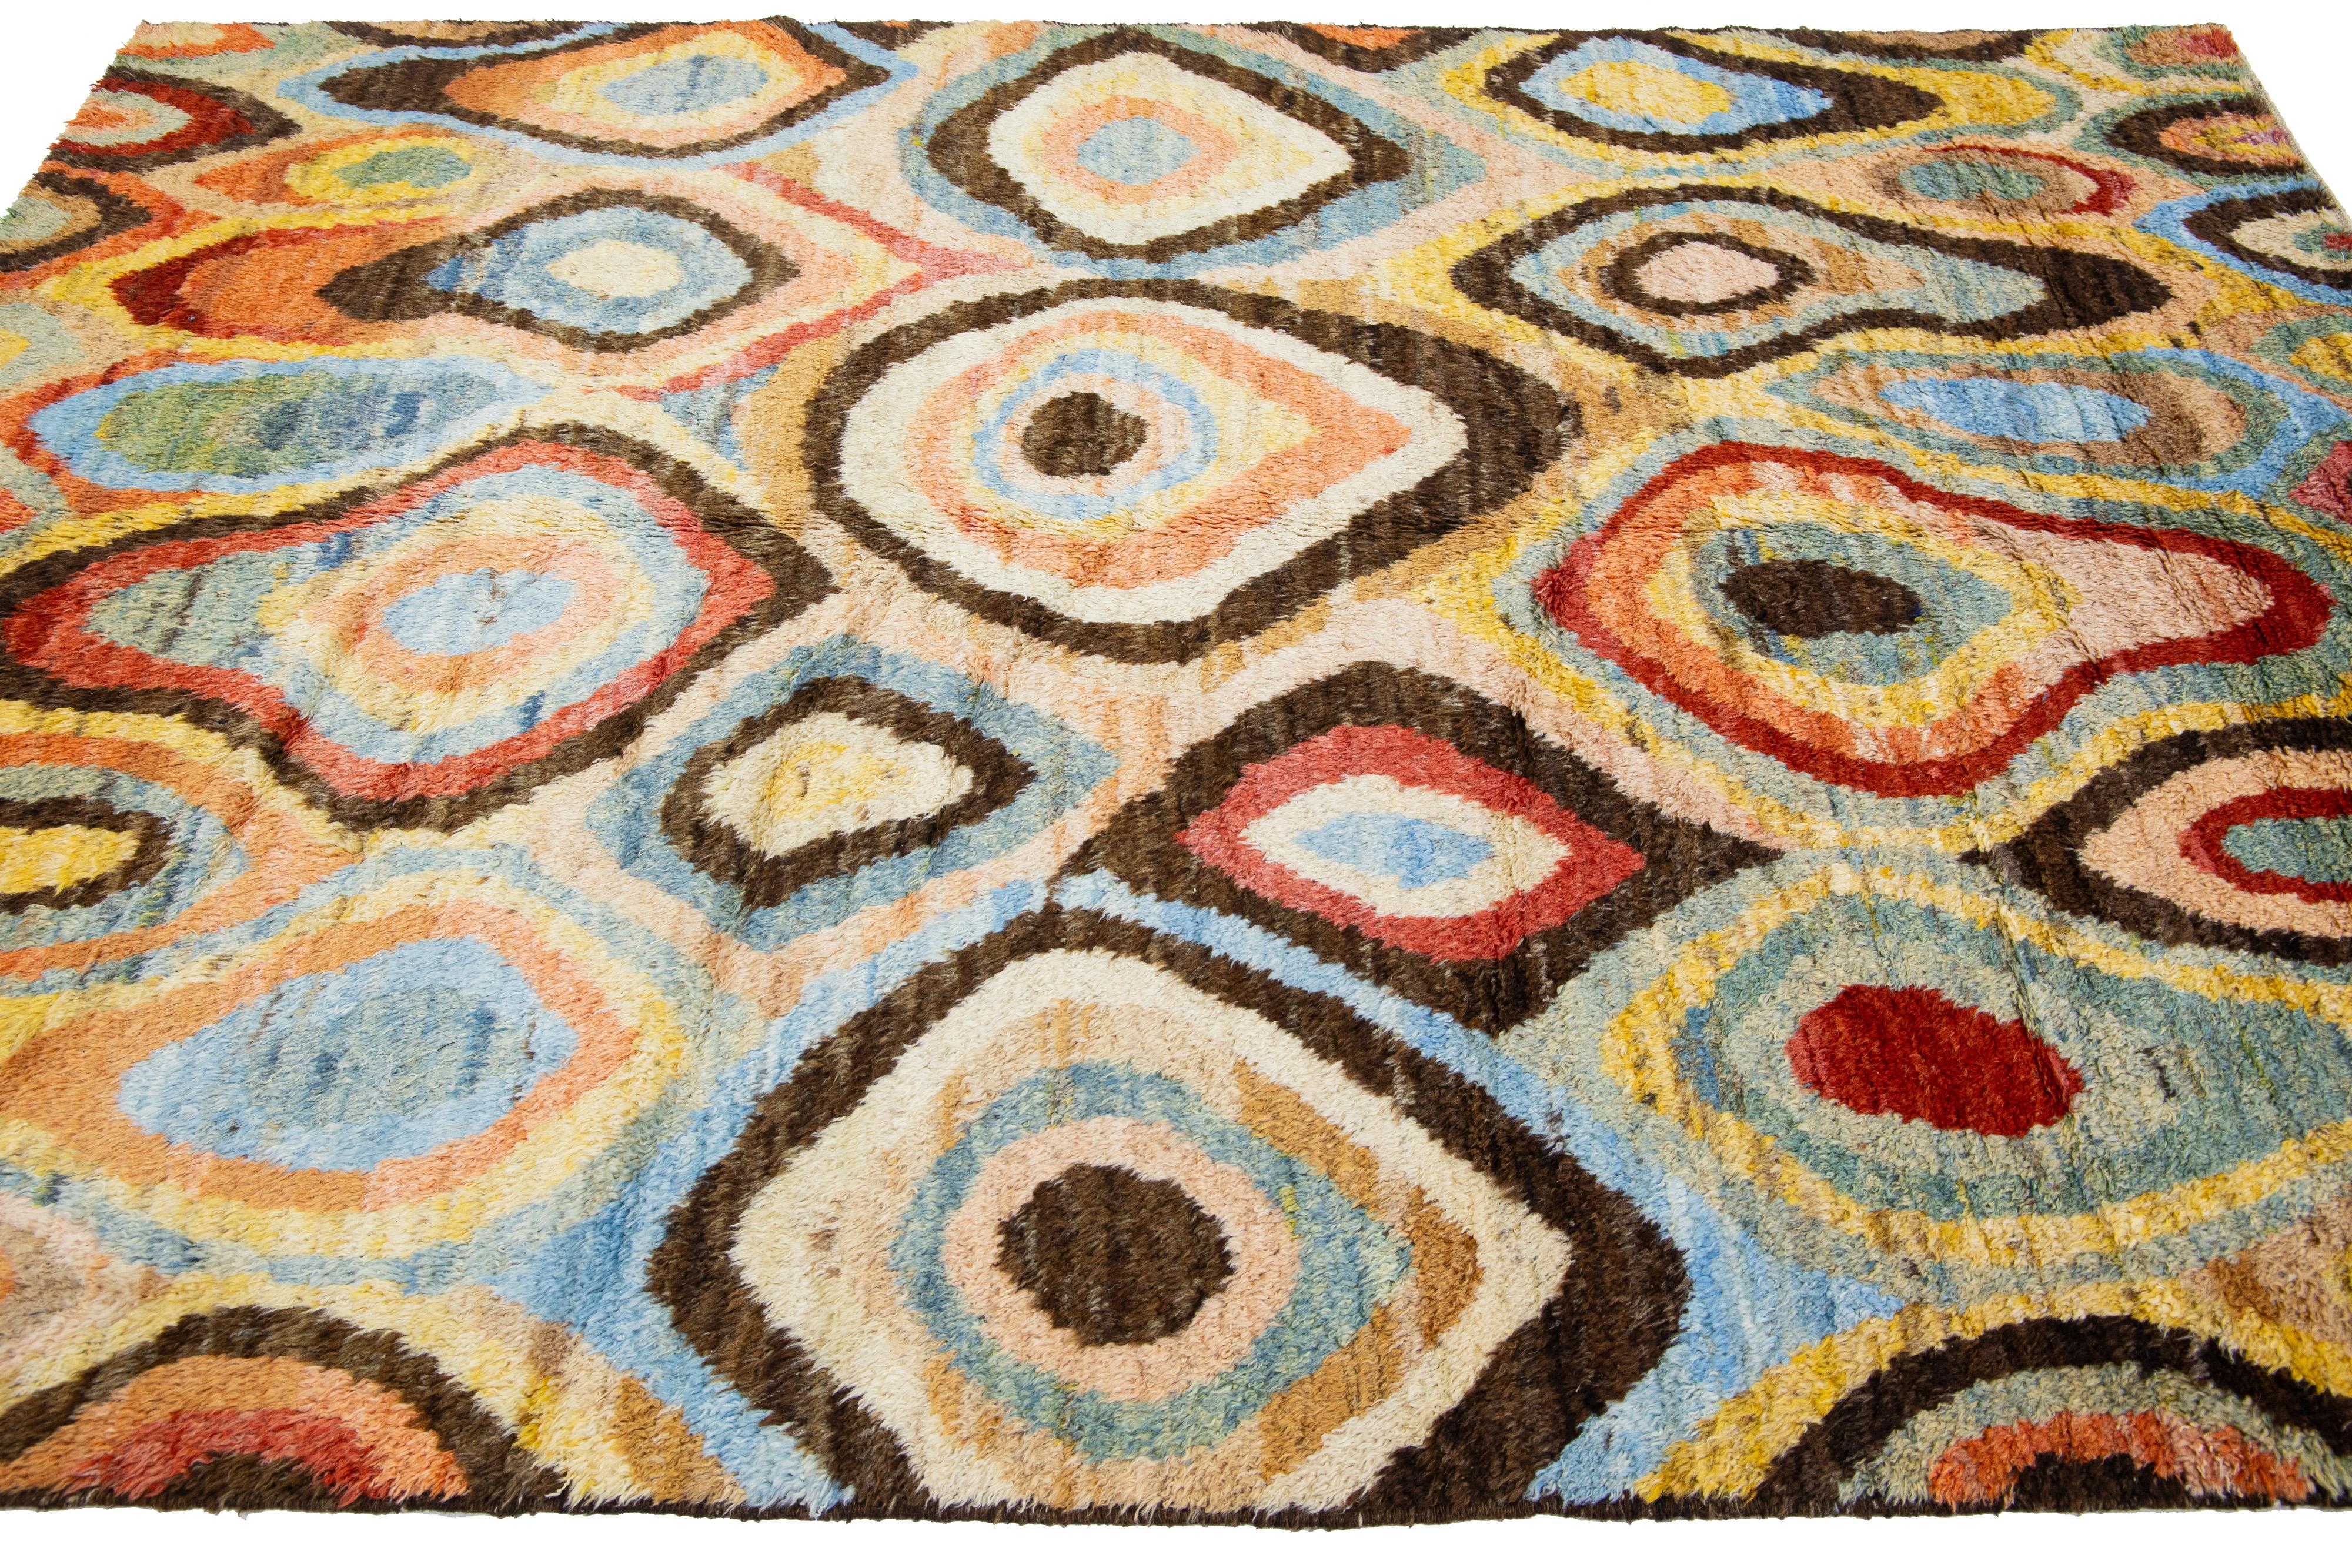 Hand-Knotted Contemporary Handmade Moroccan-Style Wool Rug In Multicolor by Apadana For Sale